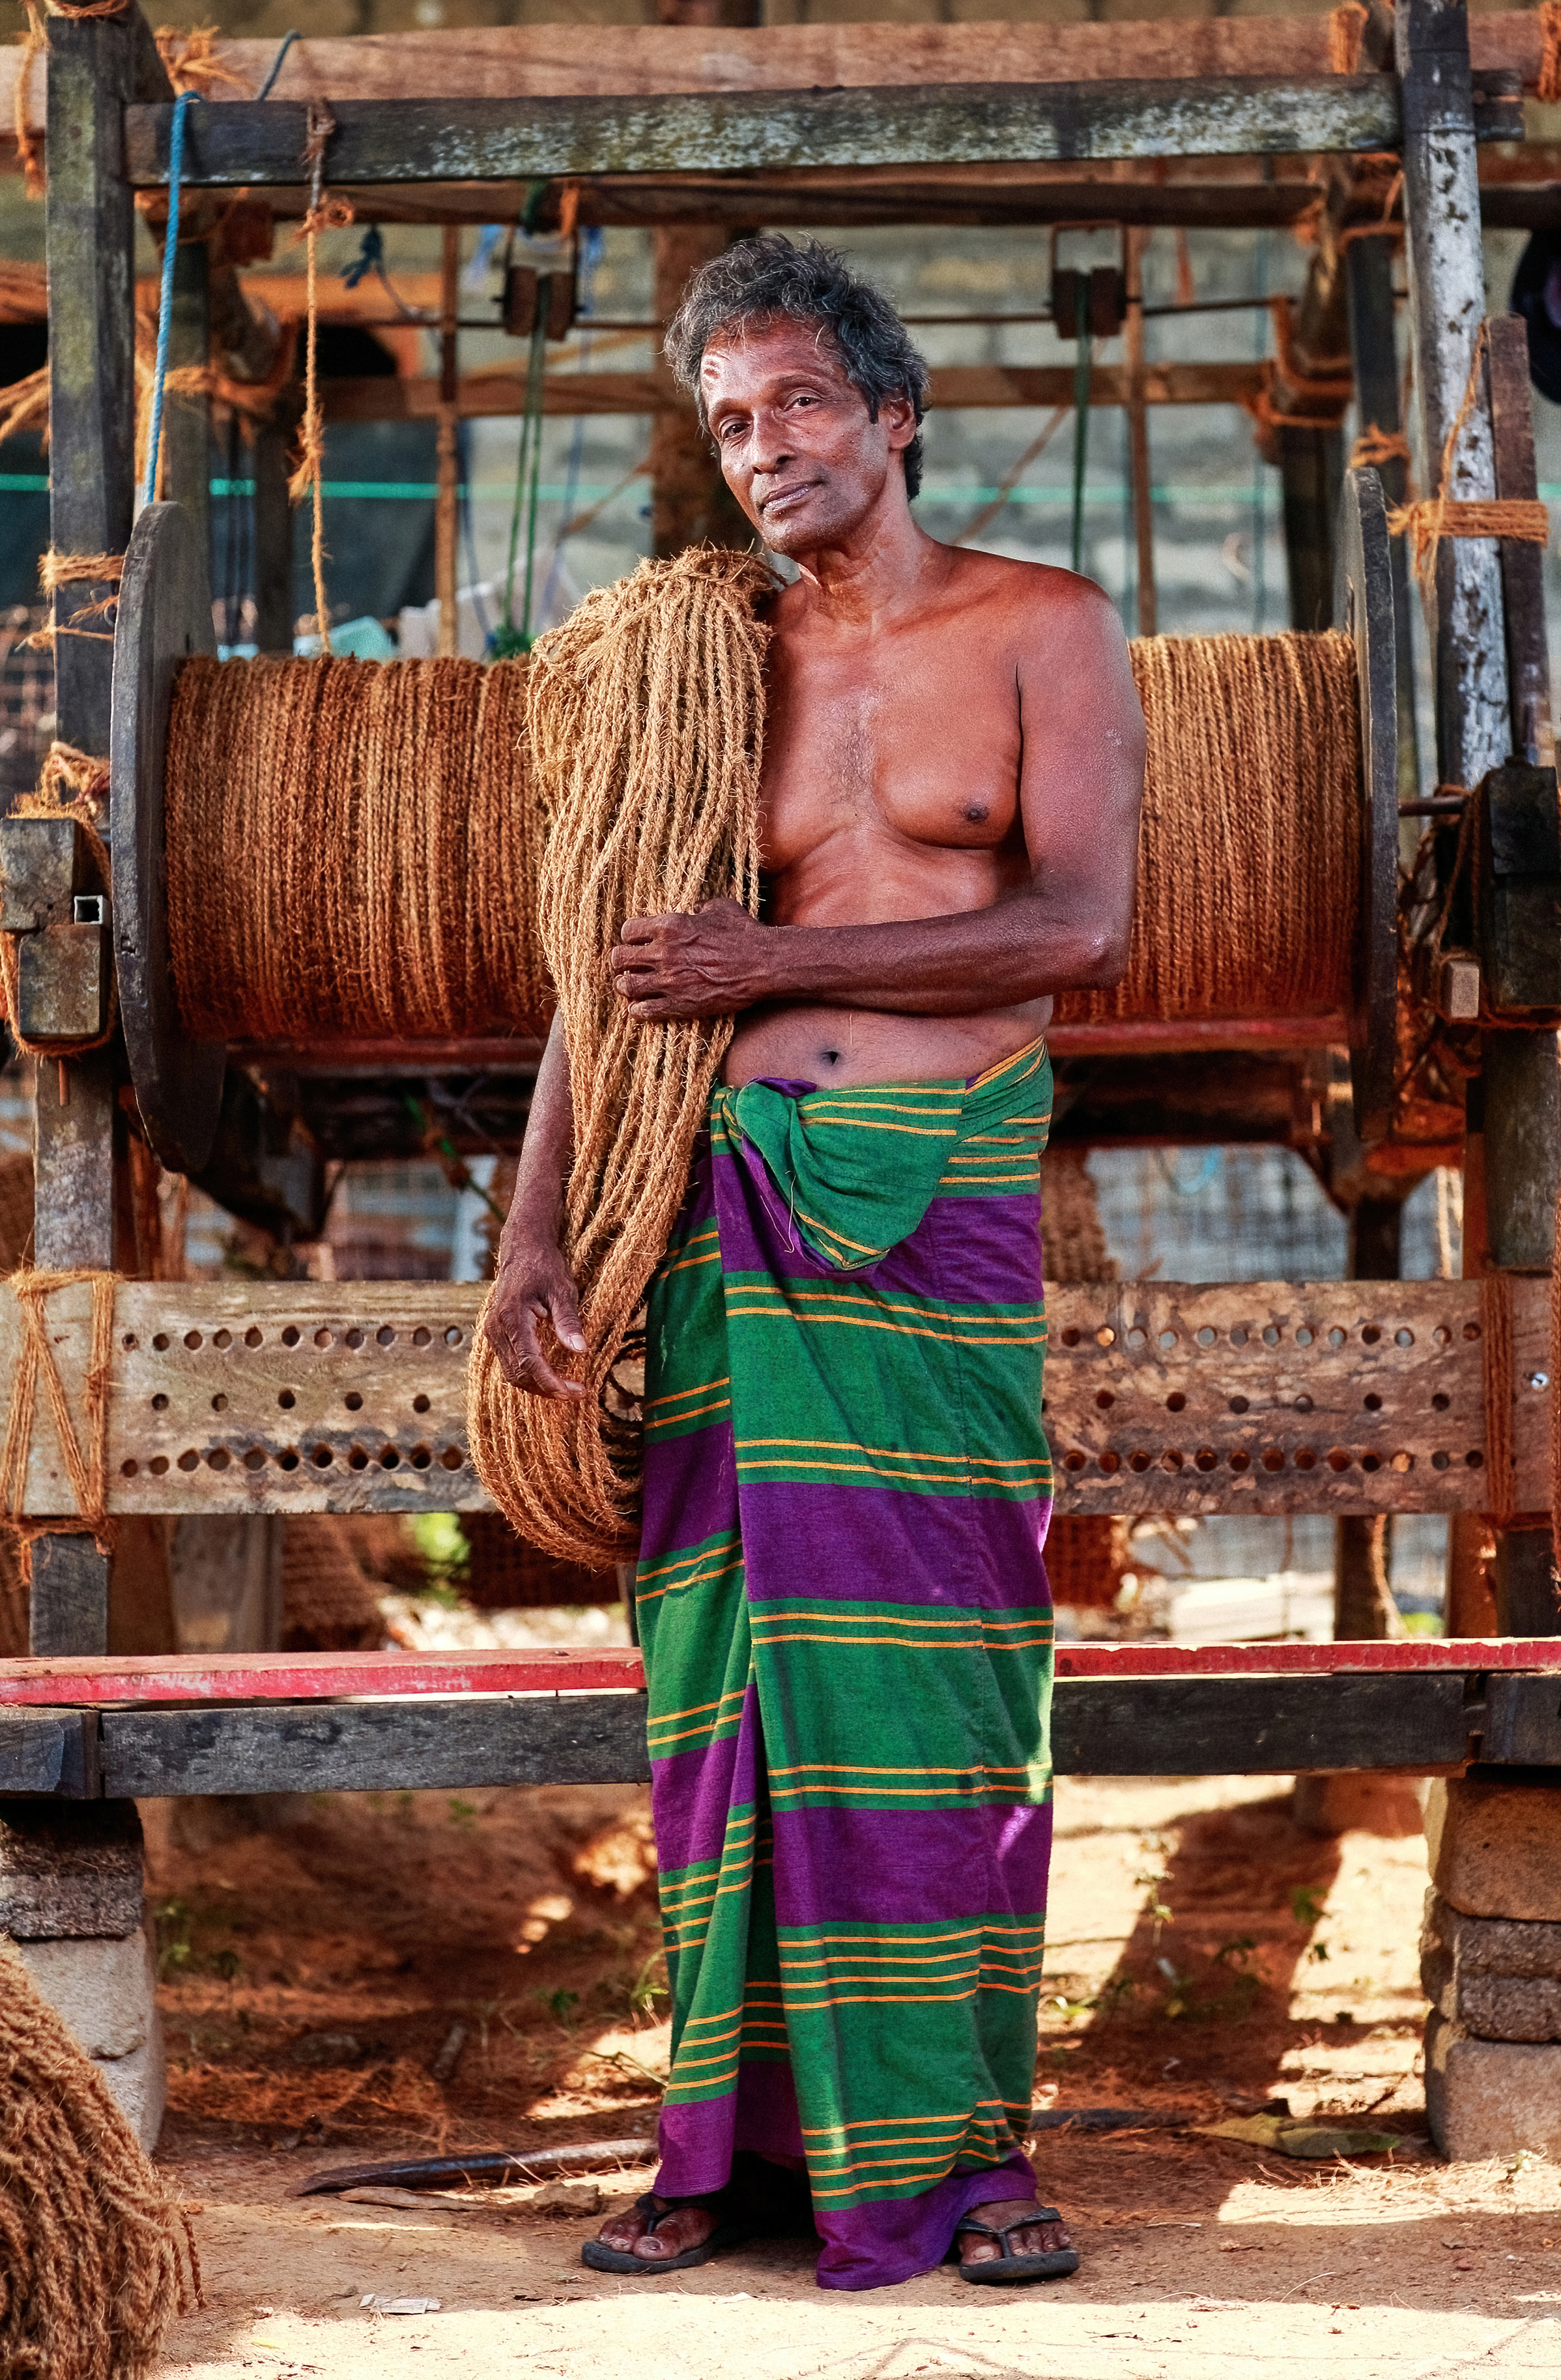 File:Traditional worker with coconut rope (edited).jpg - Wikimedia Commons